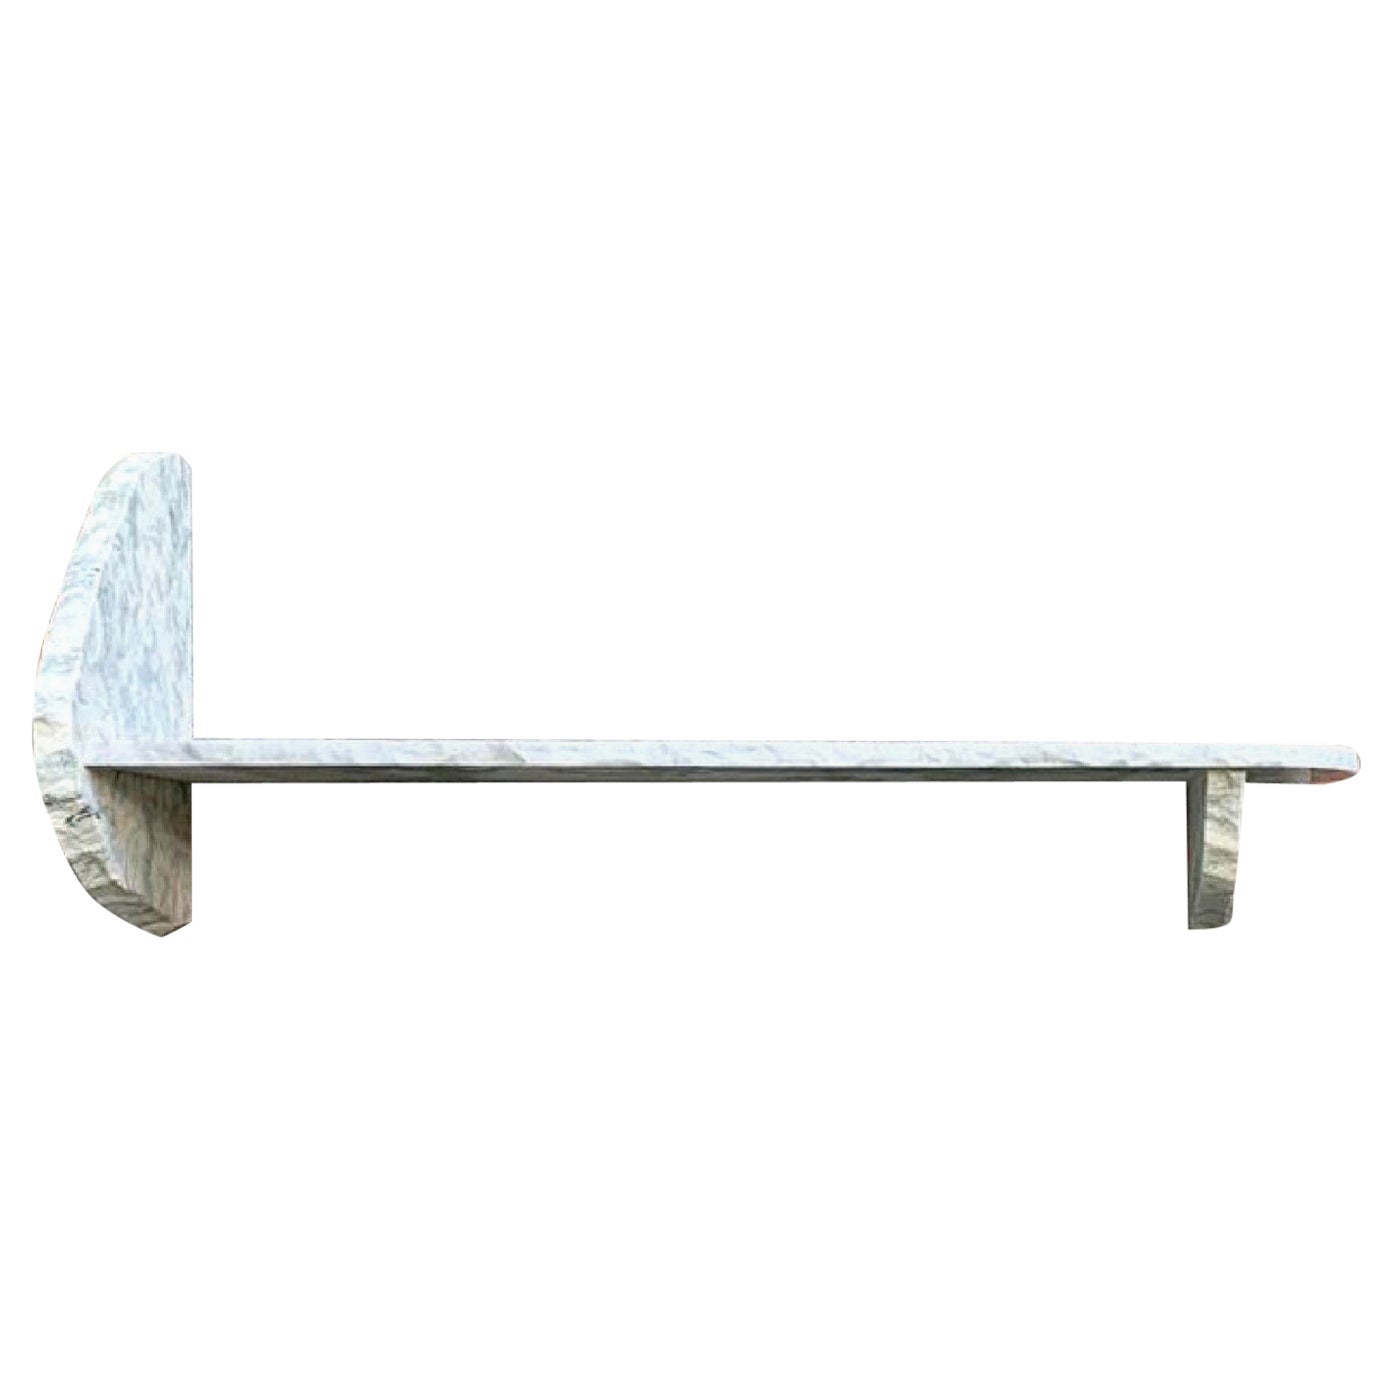 21st Century Contemporary Marble Shelf Handmade in Italy by Ilaria Bianchi For Sale